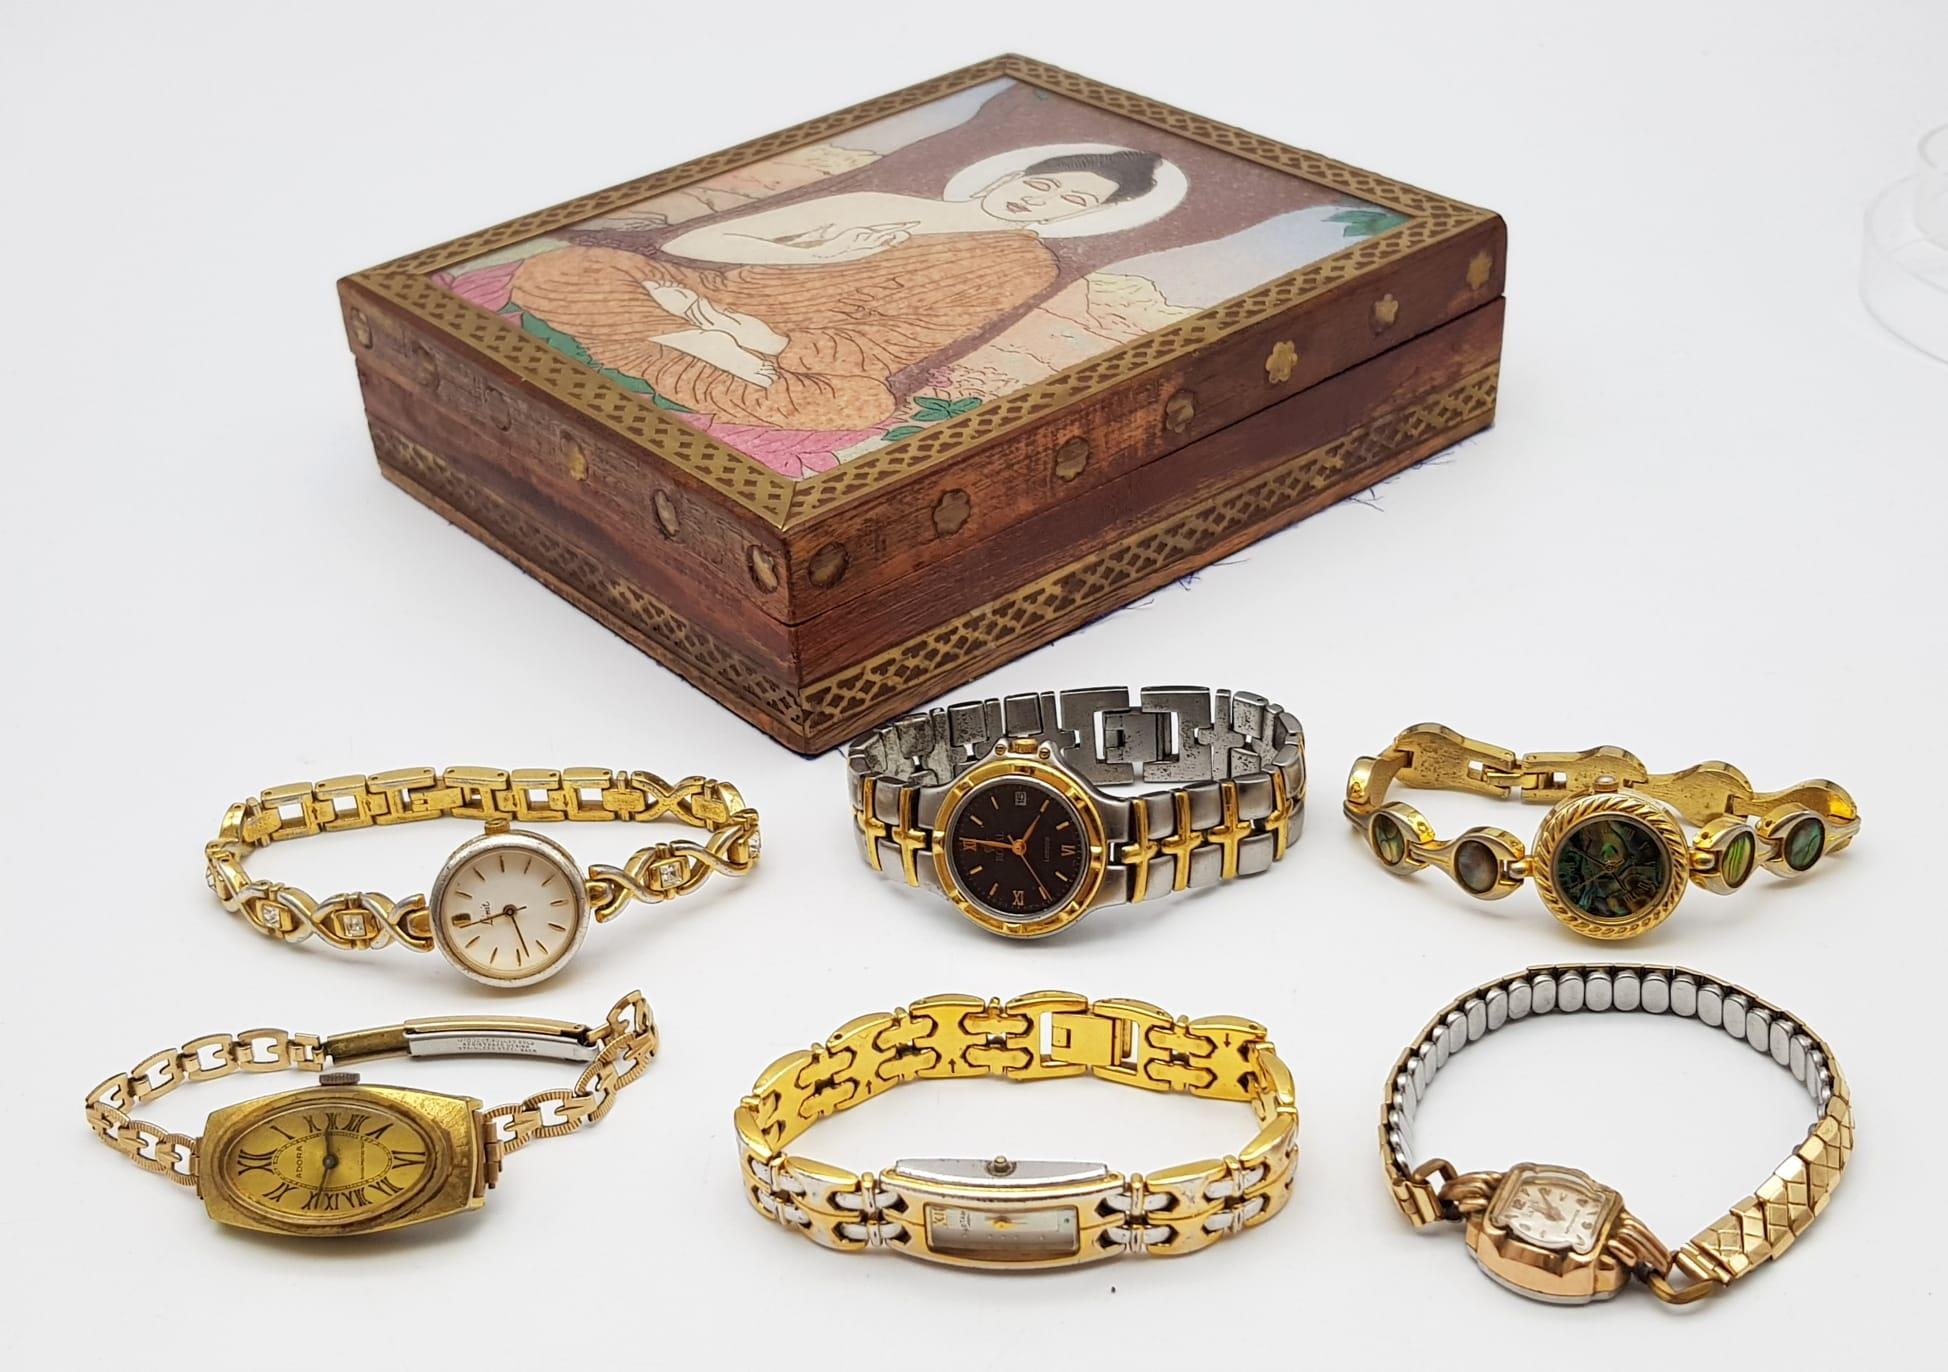 A Decorative Asian Themed Trinket Box with Six Vintage Ladies Quartz Watches - In need of batteries.